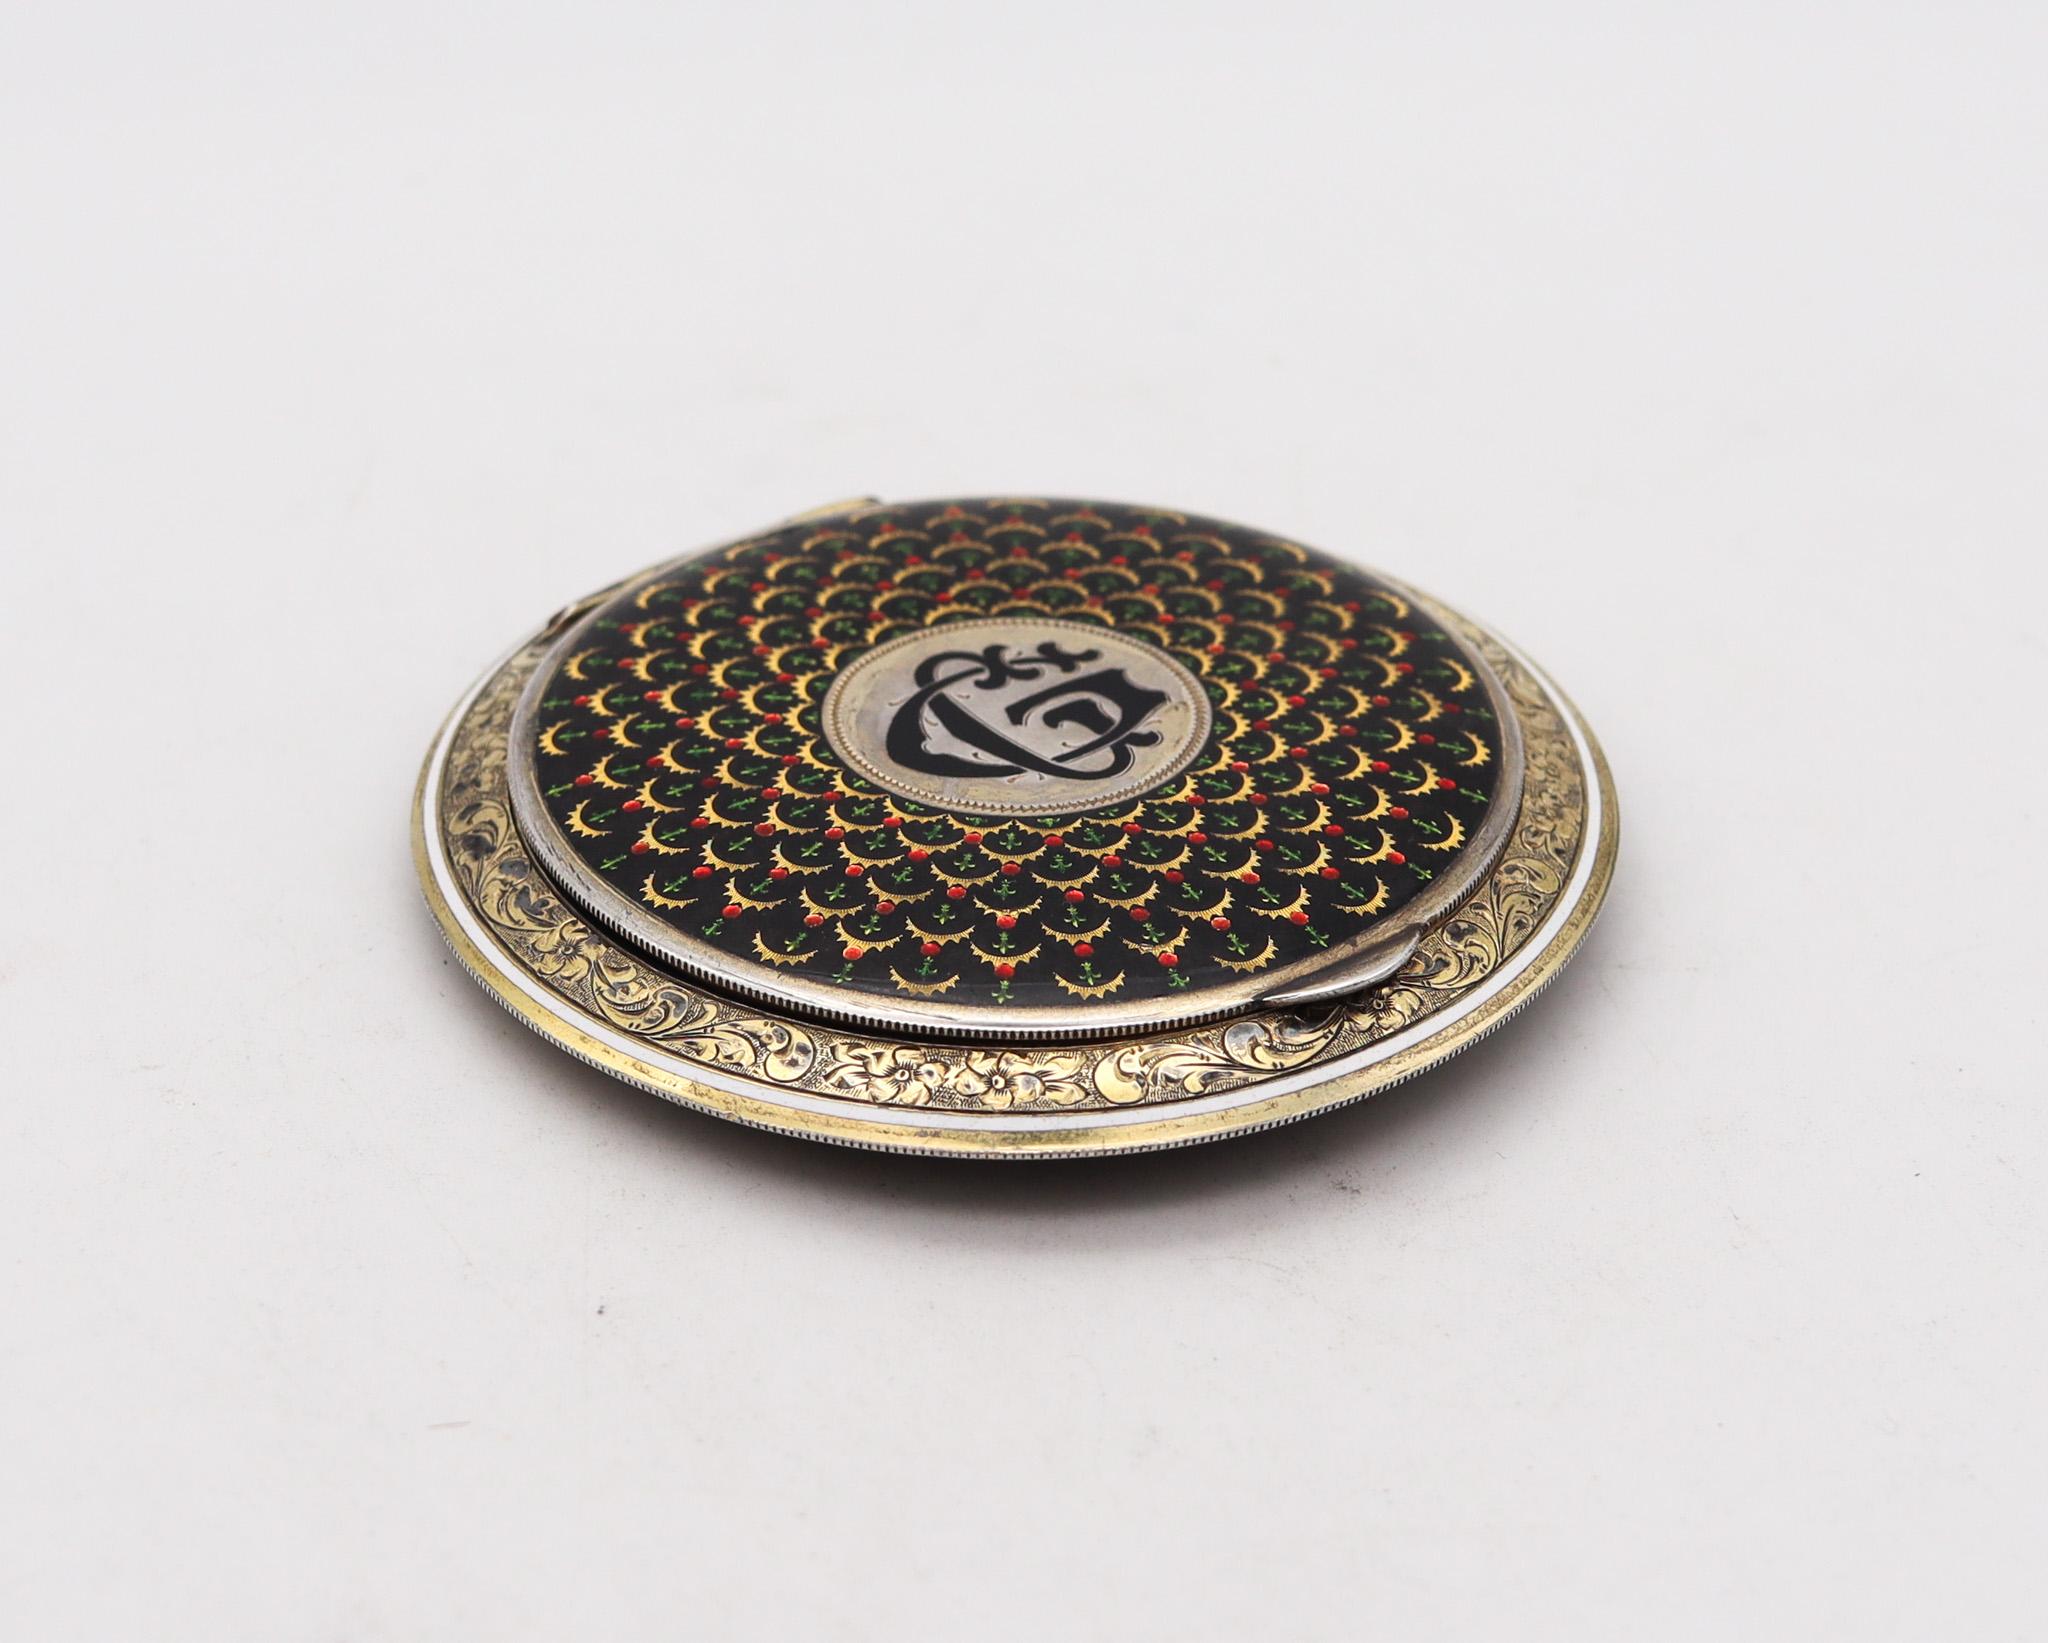 Enameled compact box by Louis Kuppenheim for Alfred Dunhill. 

An extraordinary round compact box, created in the city of Pforzheim Germany during the art deco period, back in the late 1920's. This superb elegant round box is closely to mint